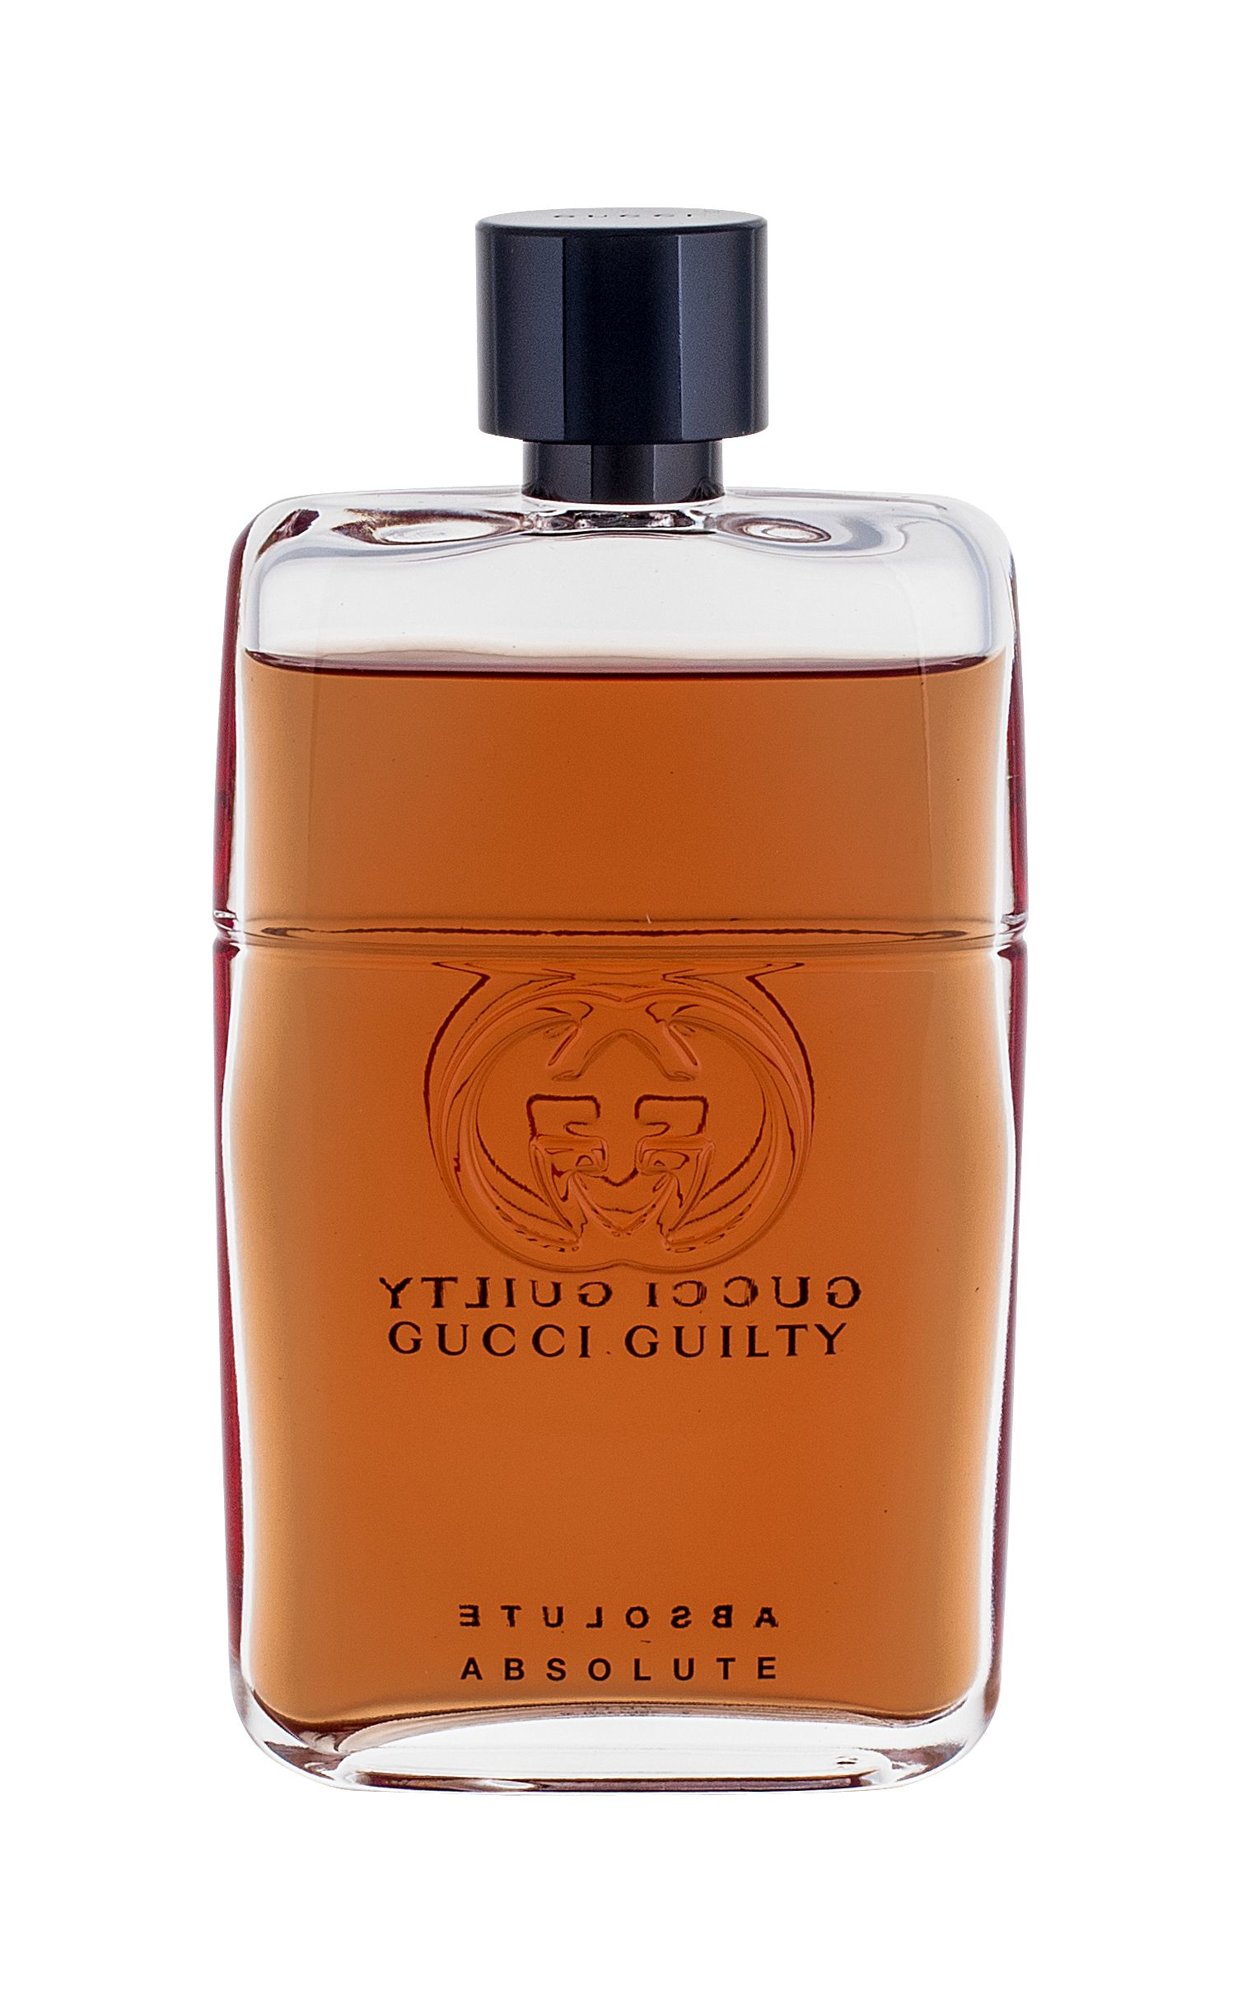 Gucci Guilty Absolute Pour Homme 90ml vanduo po skutimosi